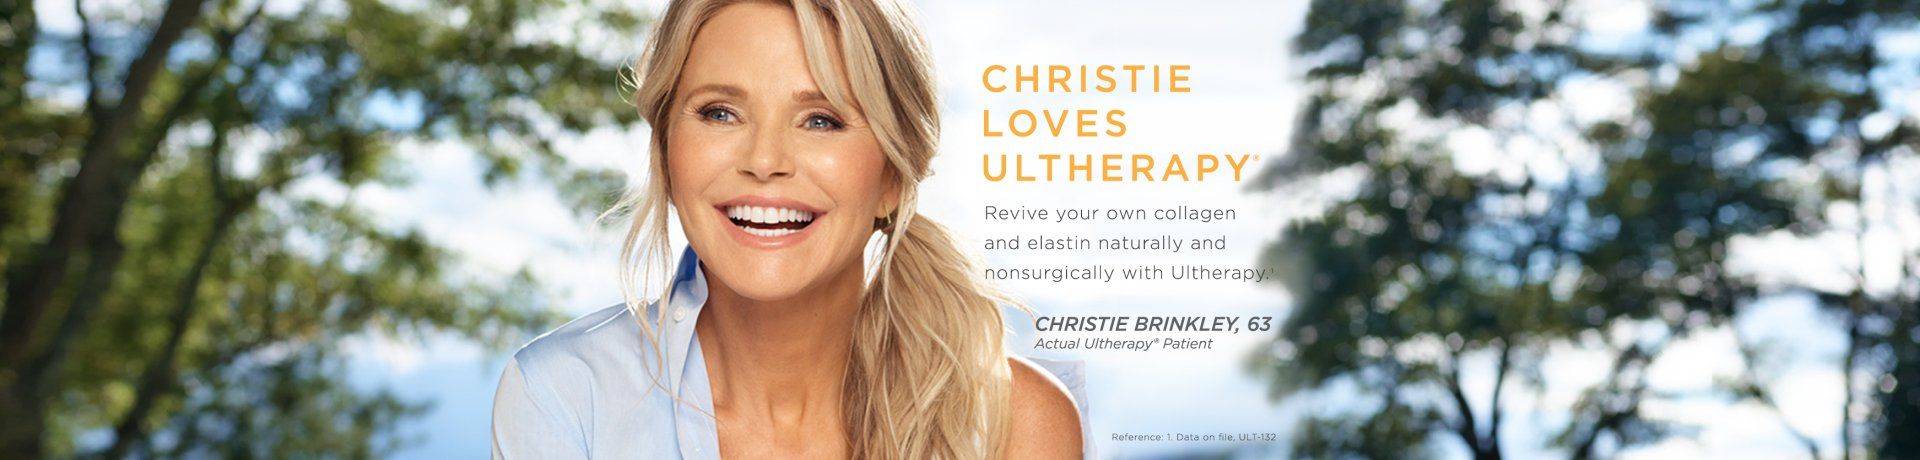 Ultherapy for Skin Lifting and Tightness